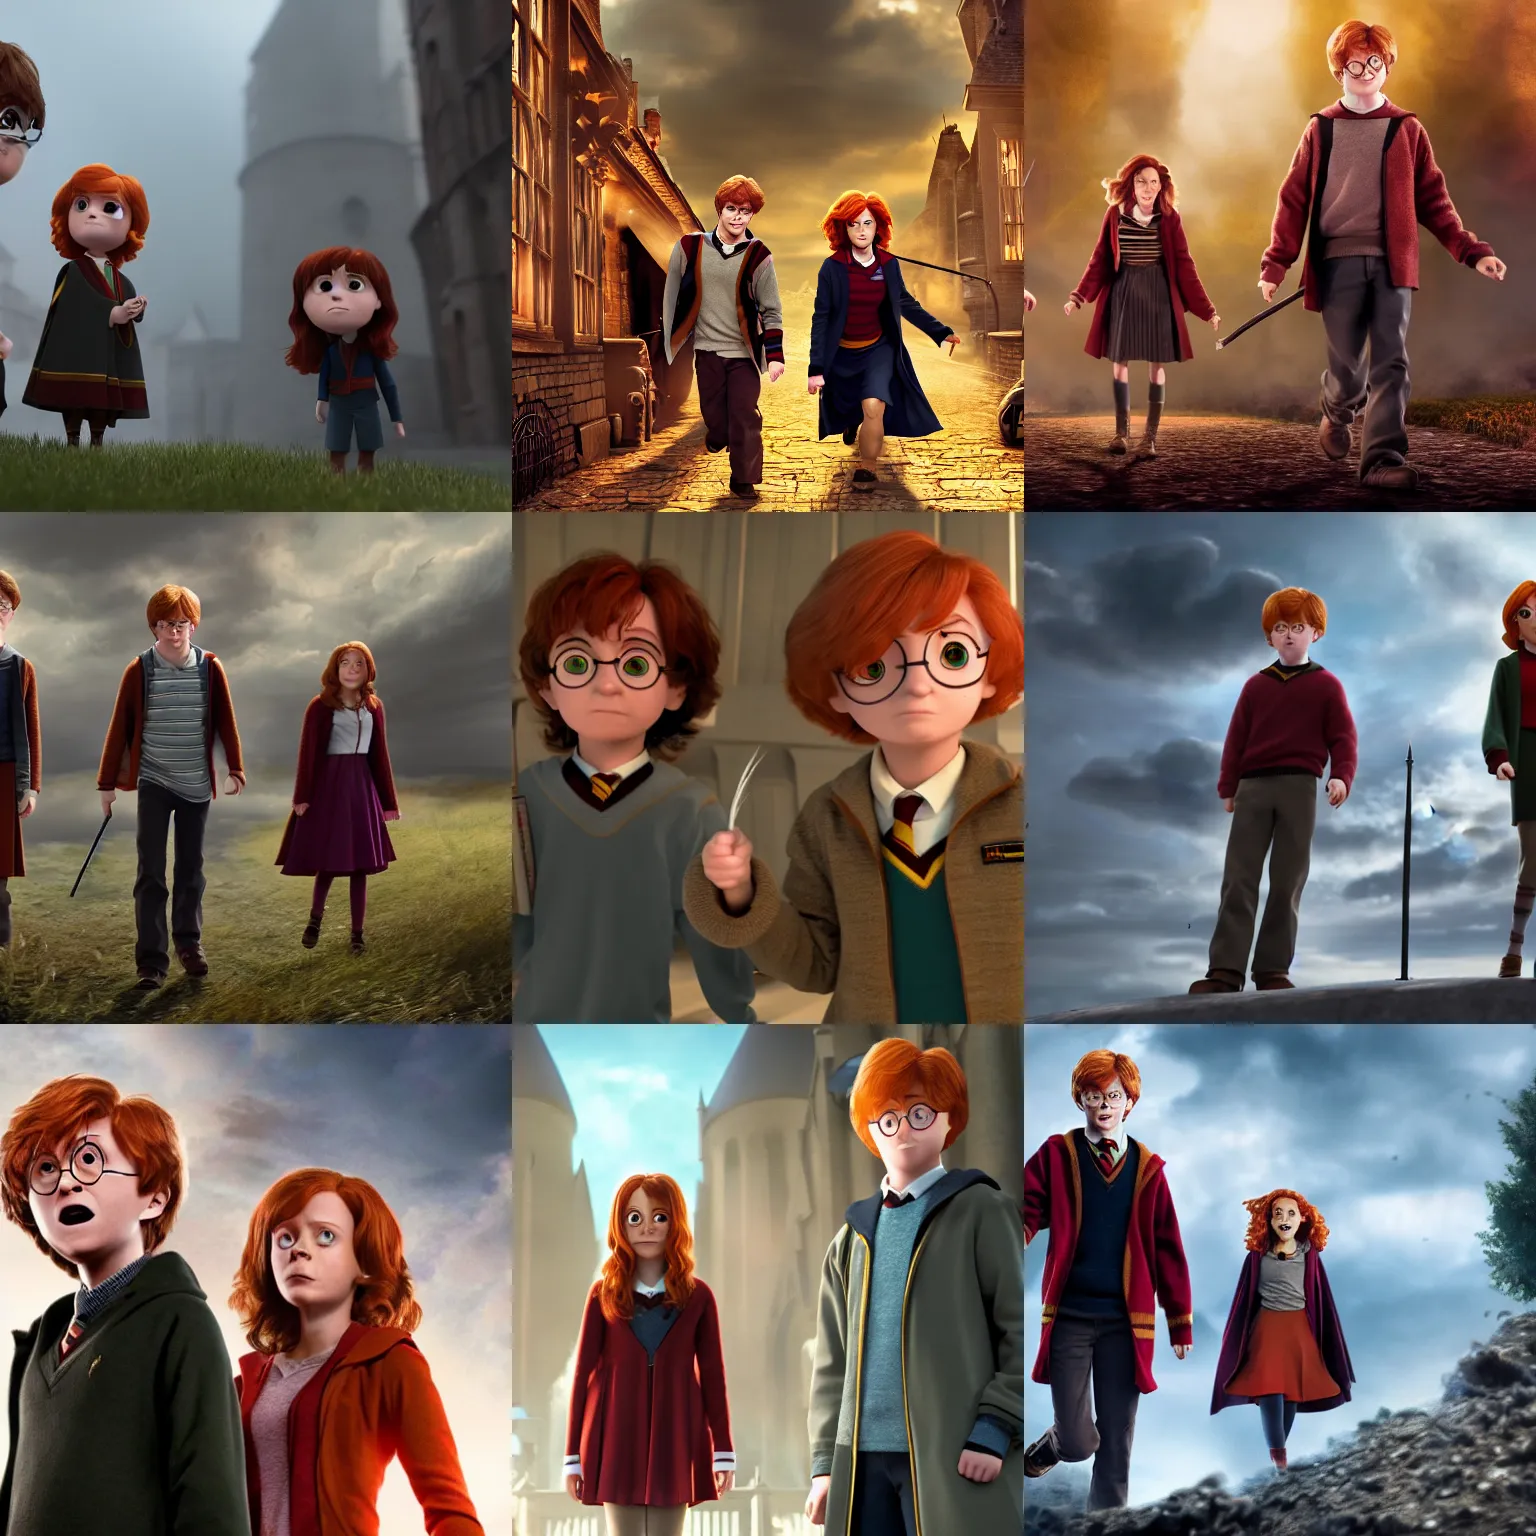 Harry Potter Who's Who: Harry, Ron & Hermione